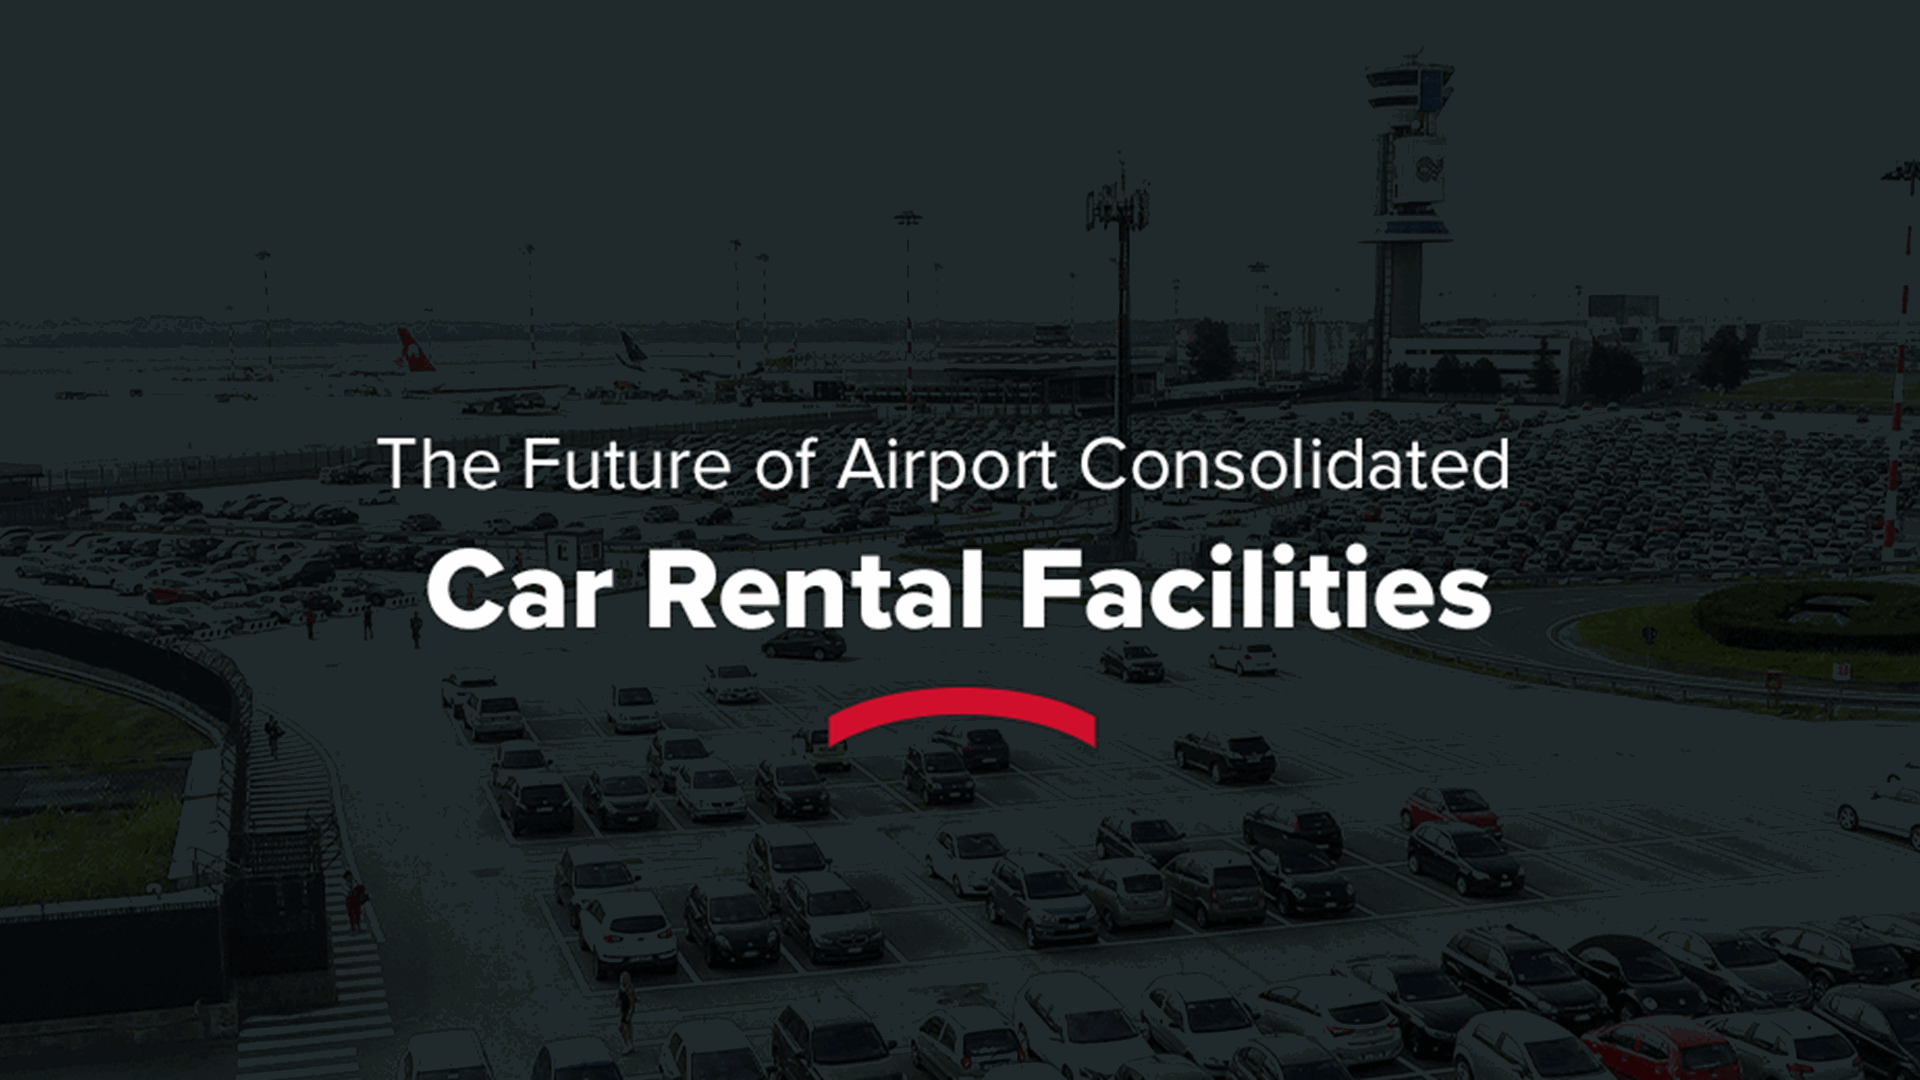 The Future of Airport Consolidated Car Rental Facilities